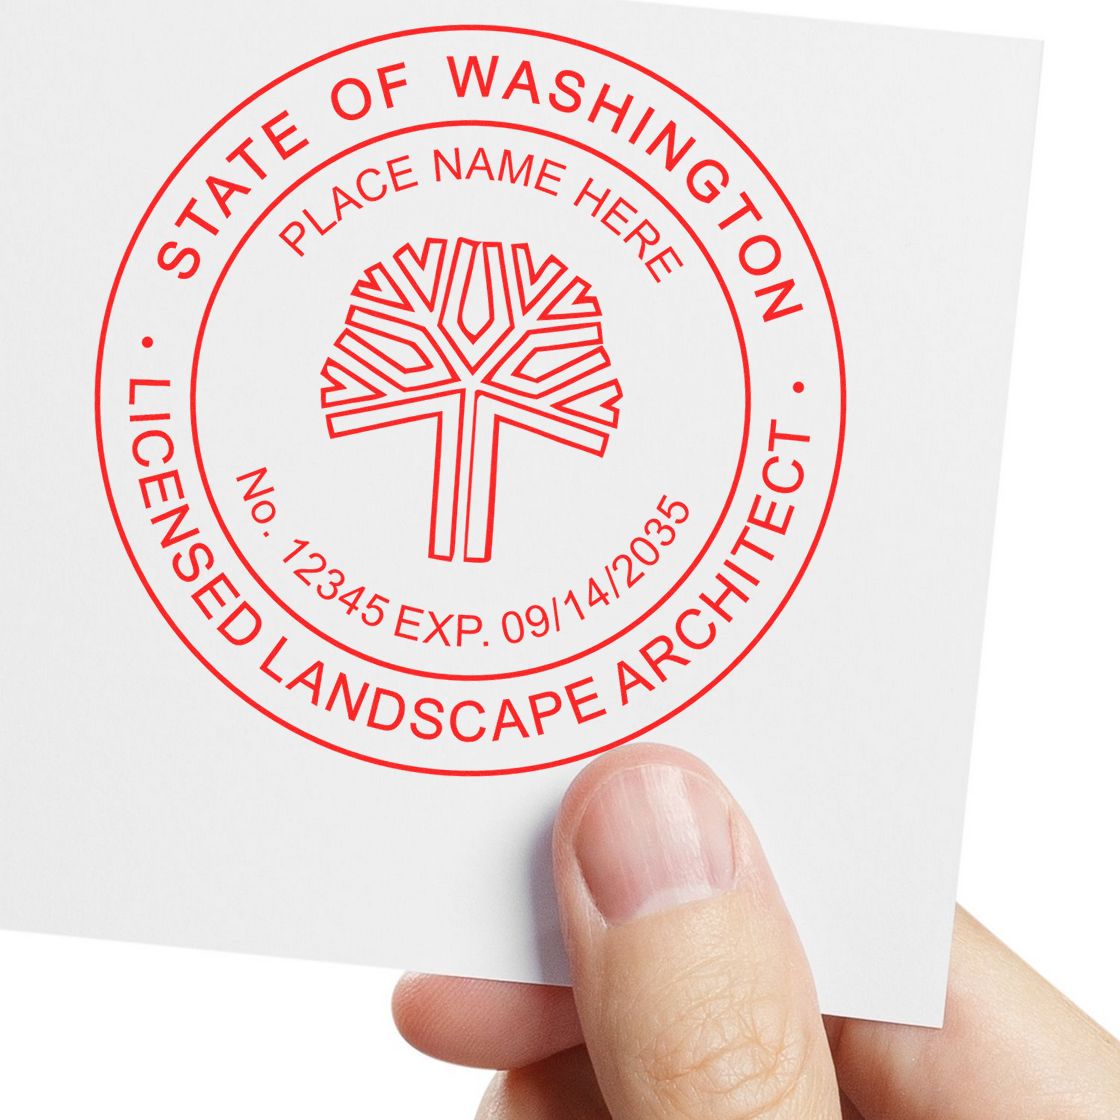 A photograph of the Digital Washington Landscape Architect Stamp stamp impression reveals a vivid, professional image of the on paper.